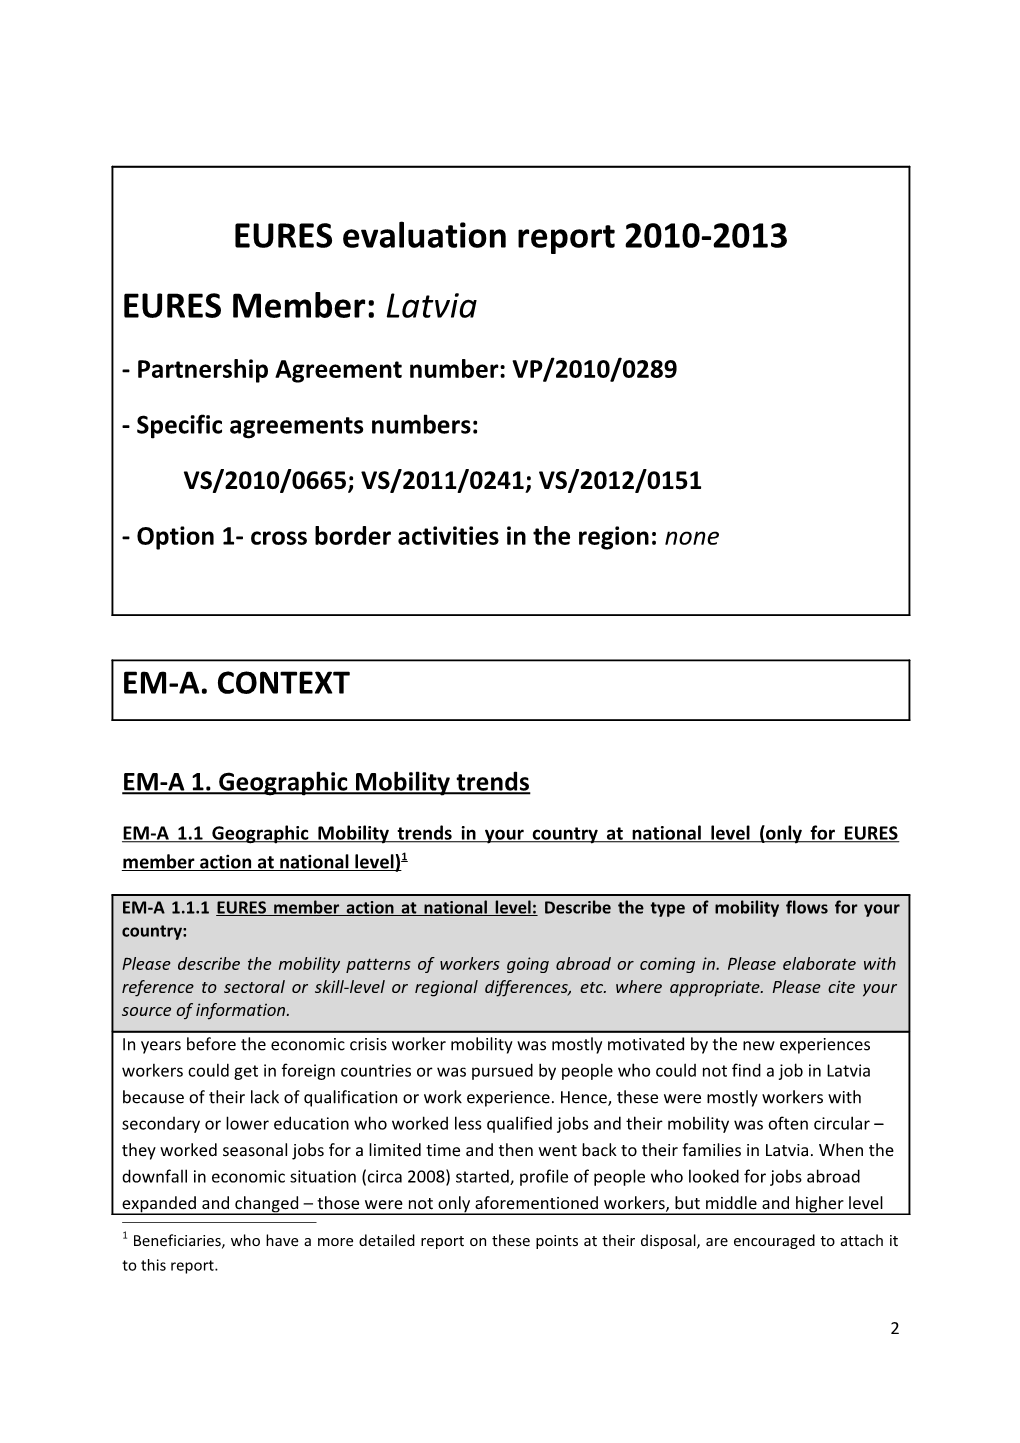 Template for Preparation by EURES Beneficiaries of The